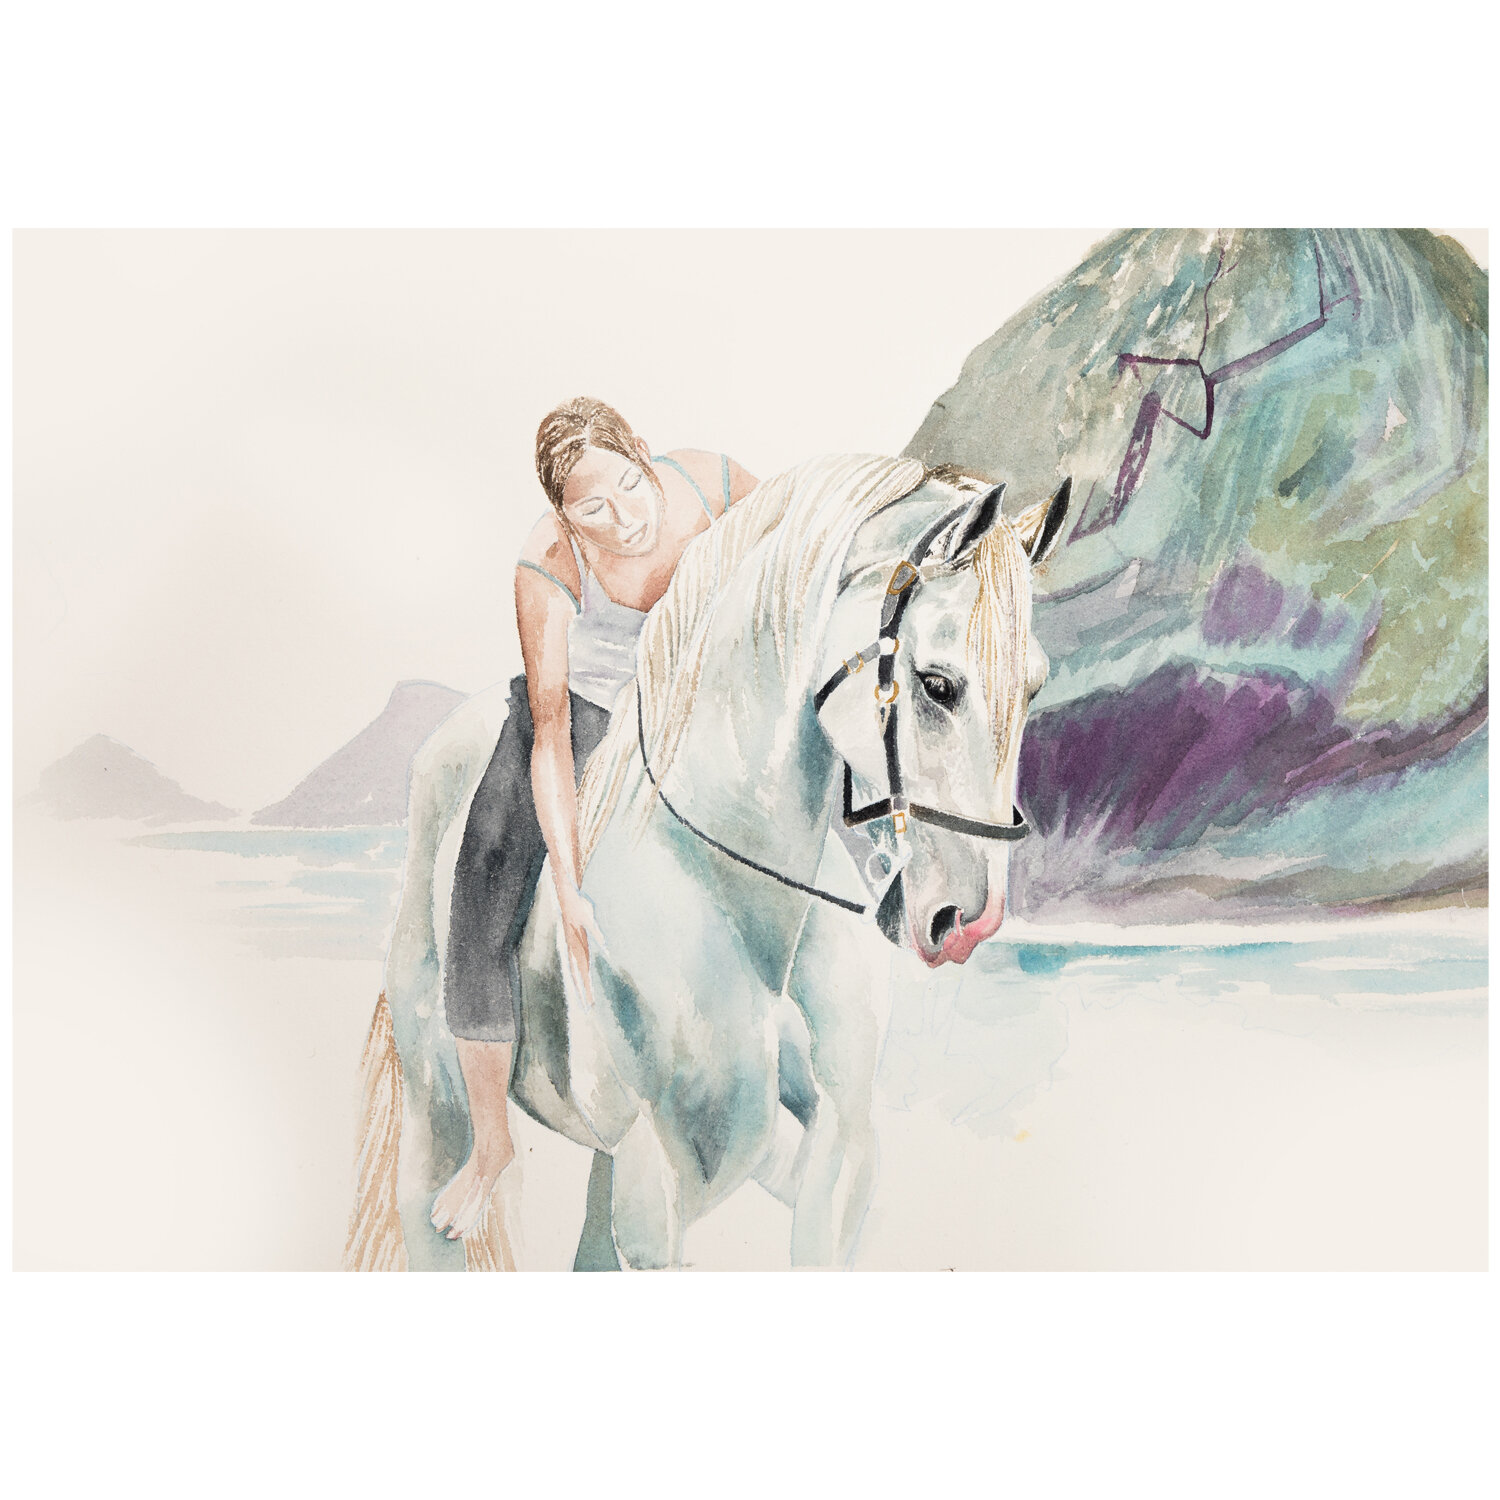 Watercolour Horse & Woman on Paper Painting - Caroline Towning.jpg